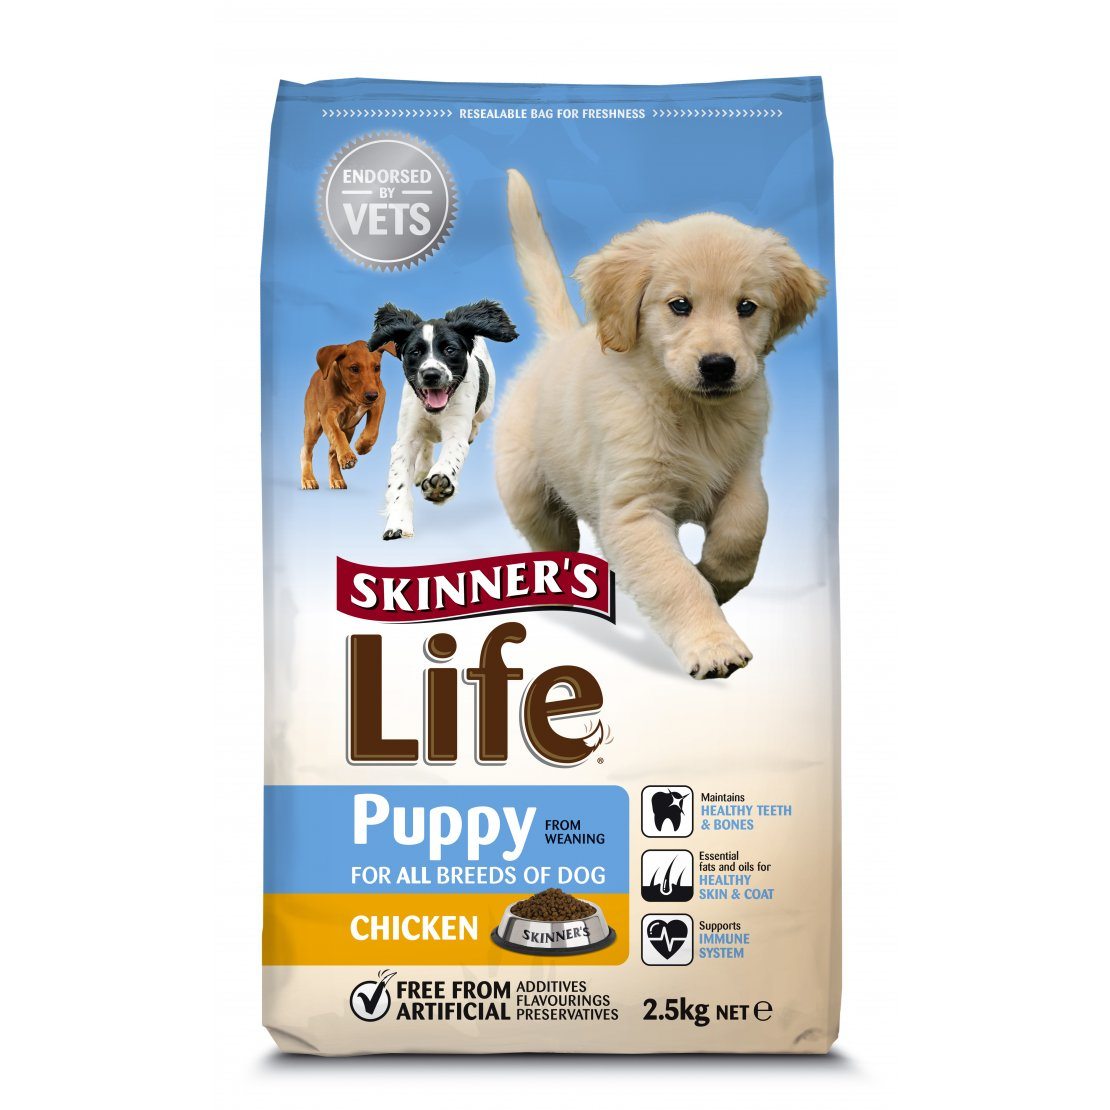 Puppy Food Calculator Uk 30LB SCIENCE DIET LARGE BREED